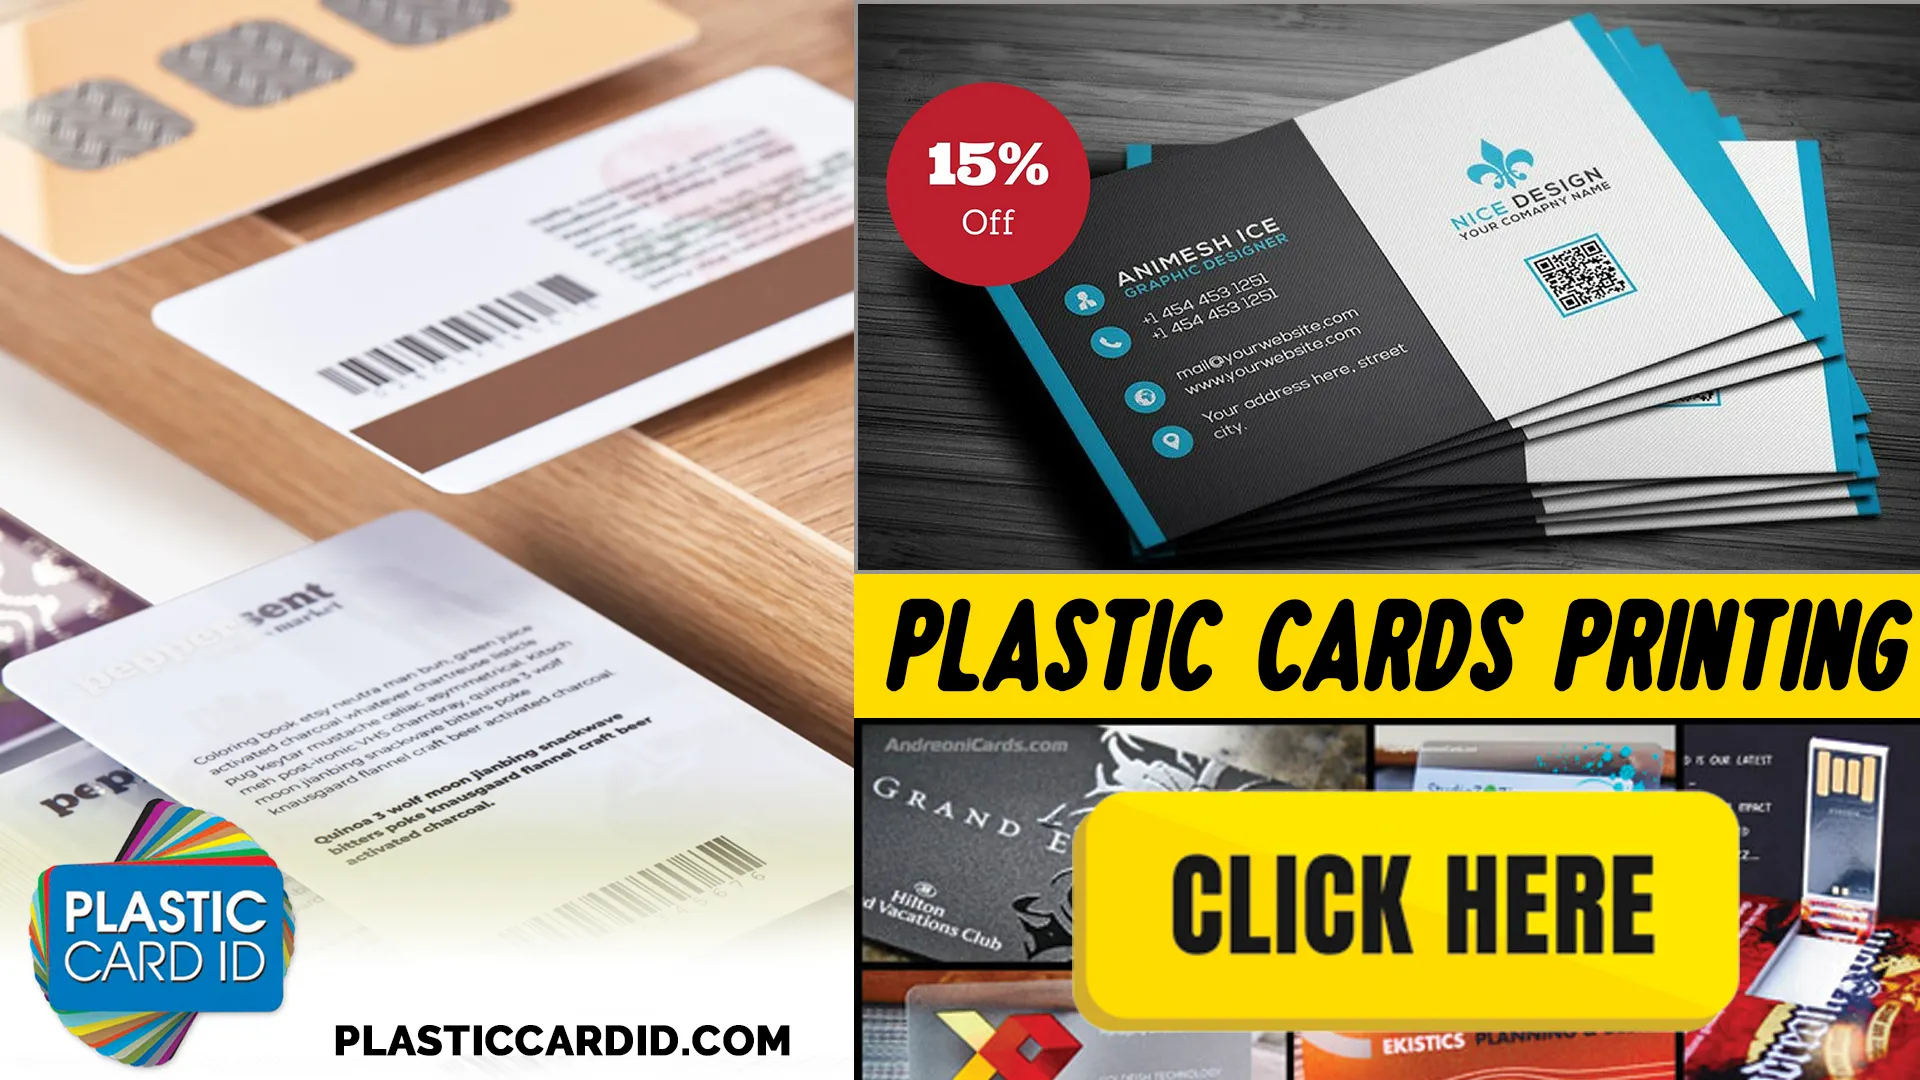 An In-Depth Look at the Card Printing Technologies Offered by Plastic Card ID
